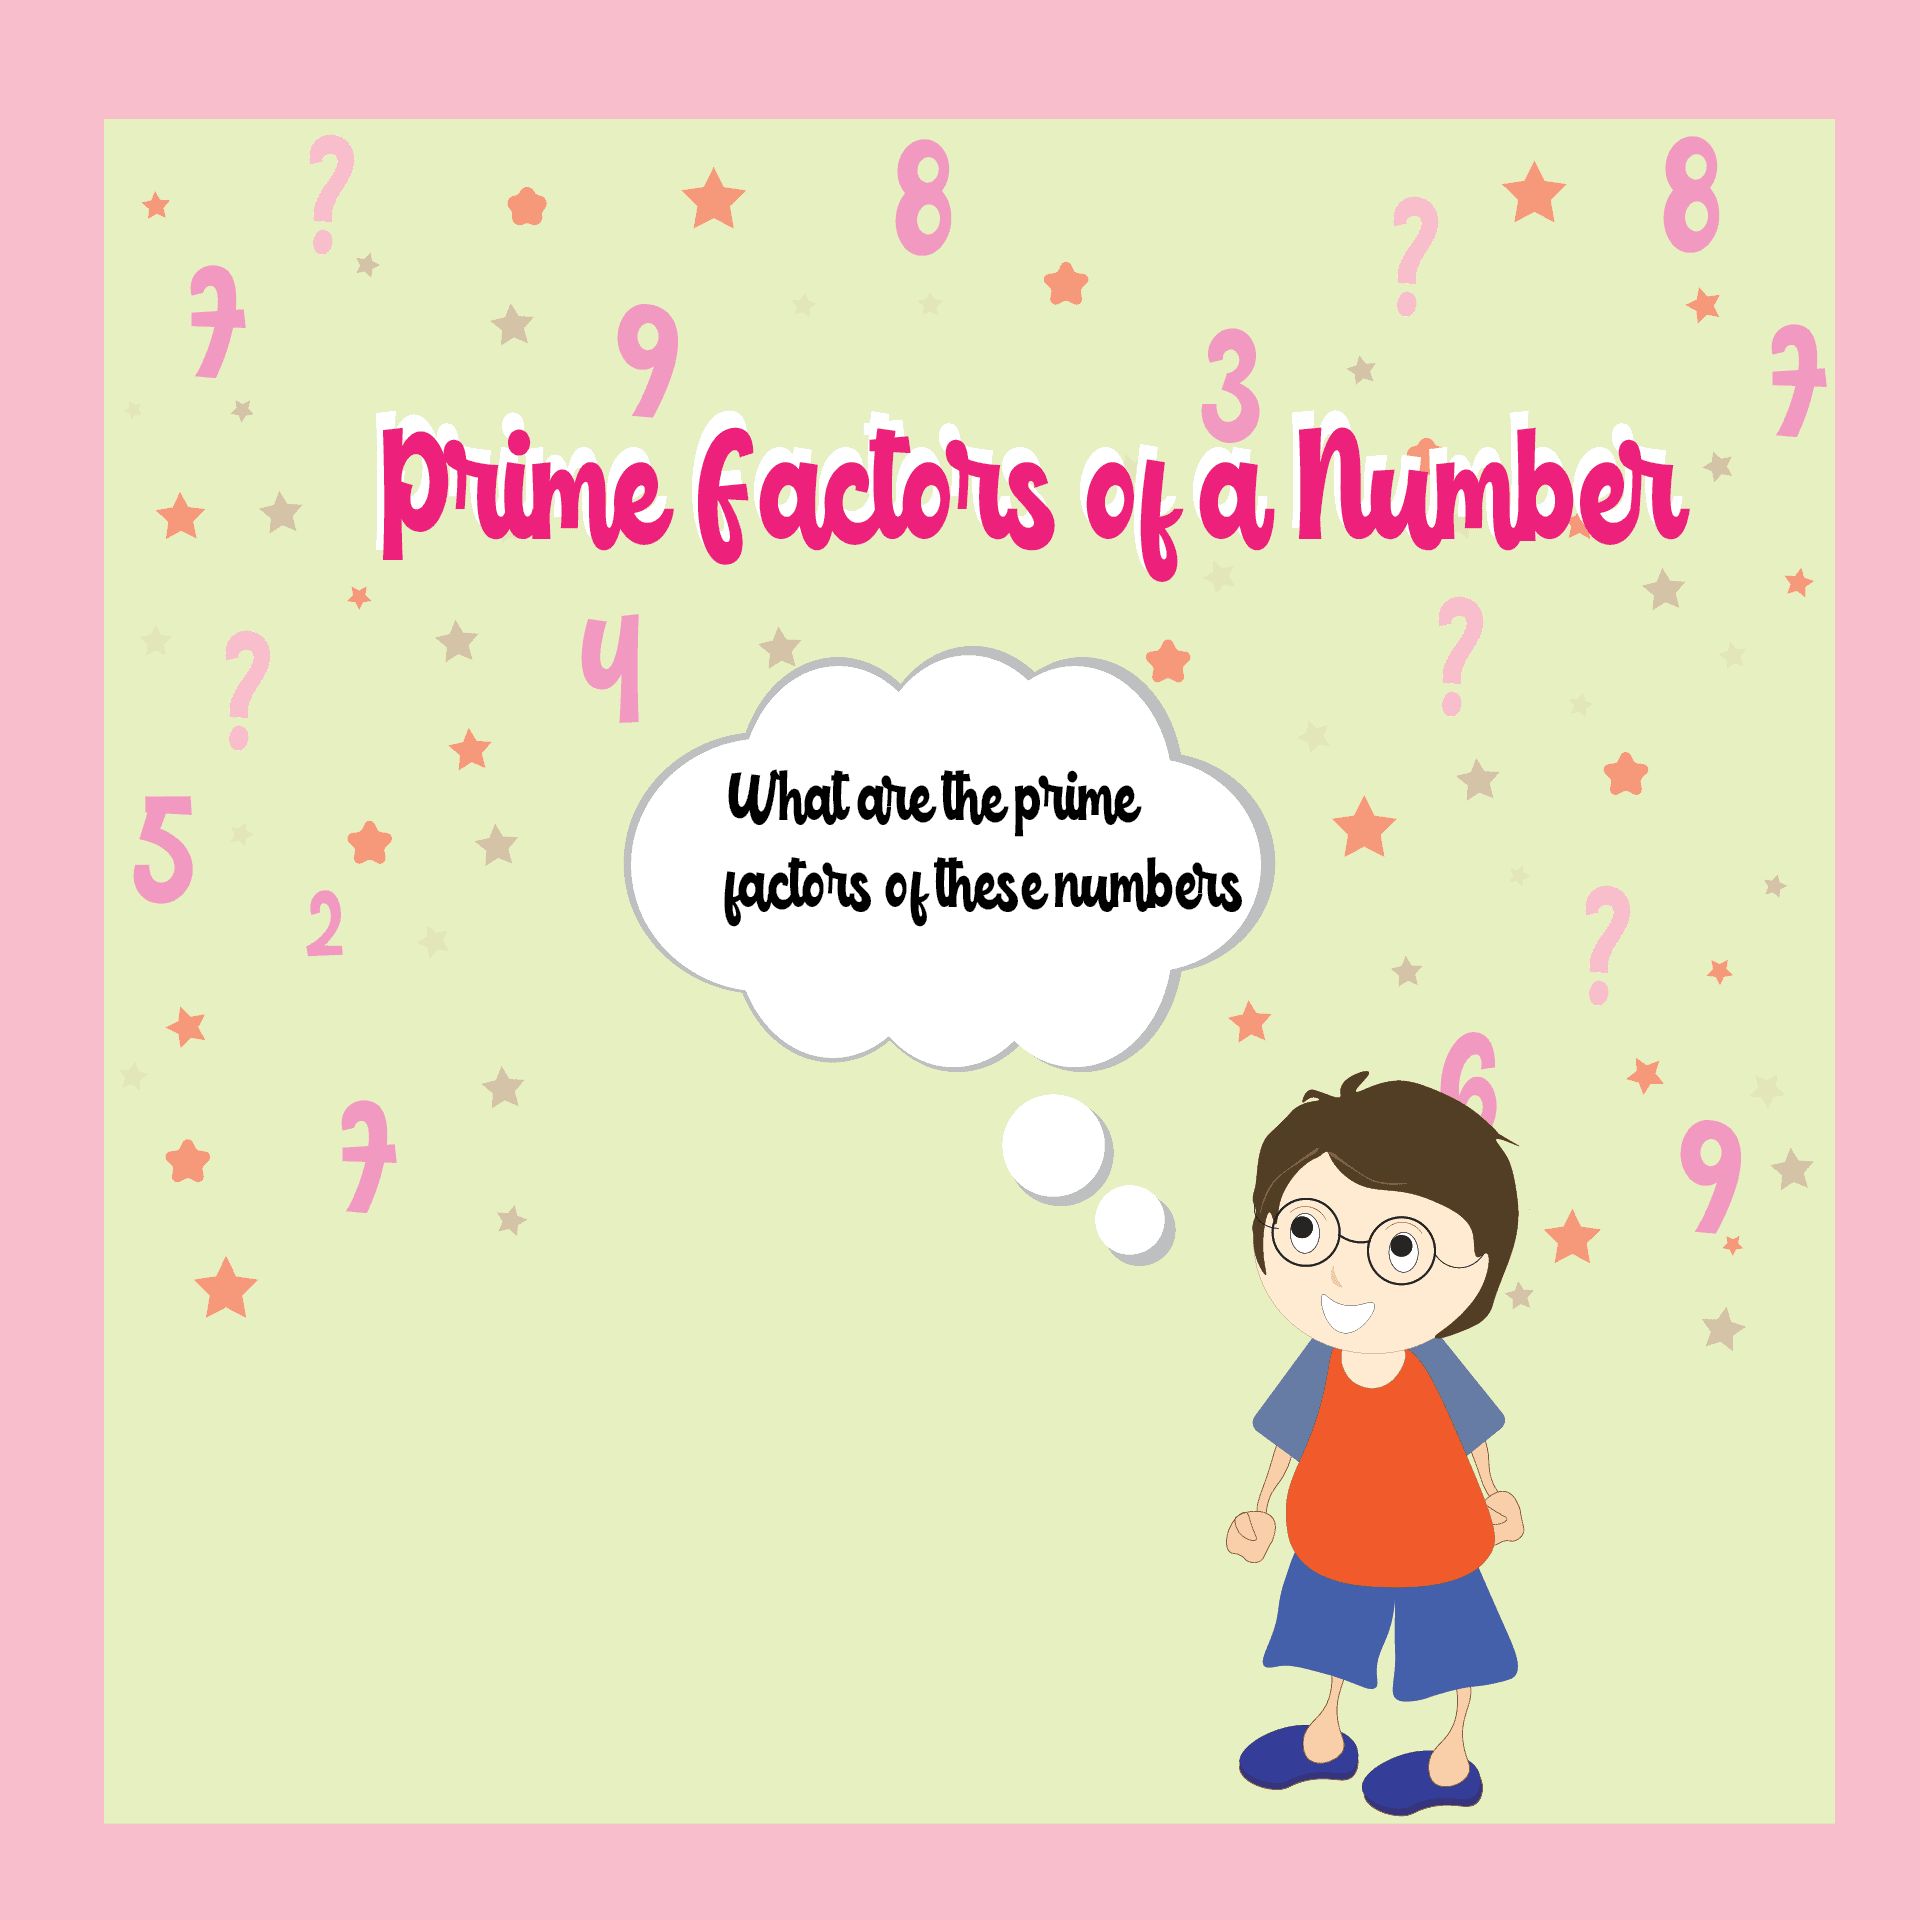 A boy wants to find the prime factors of a number with prime factorization activities